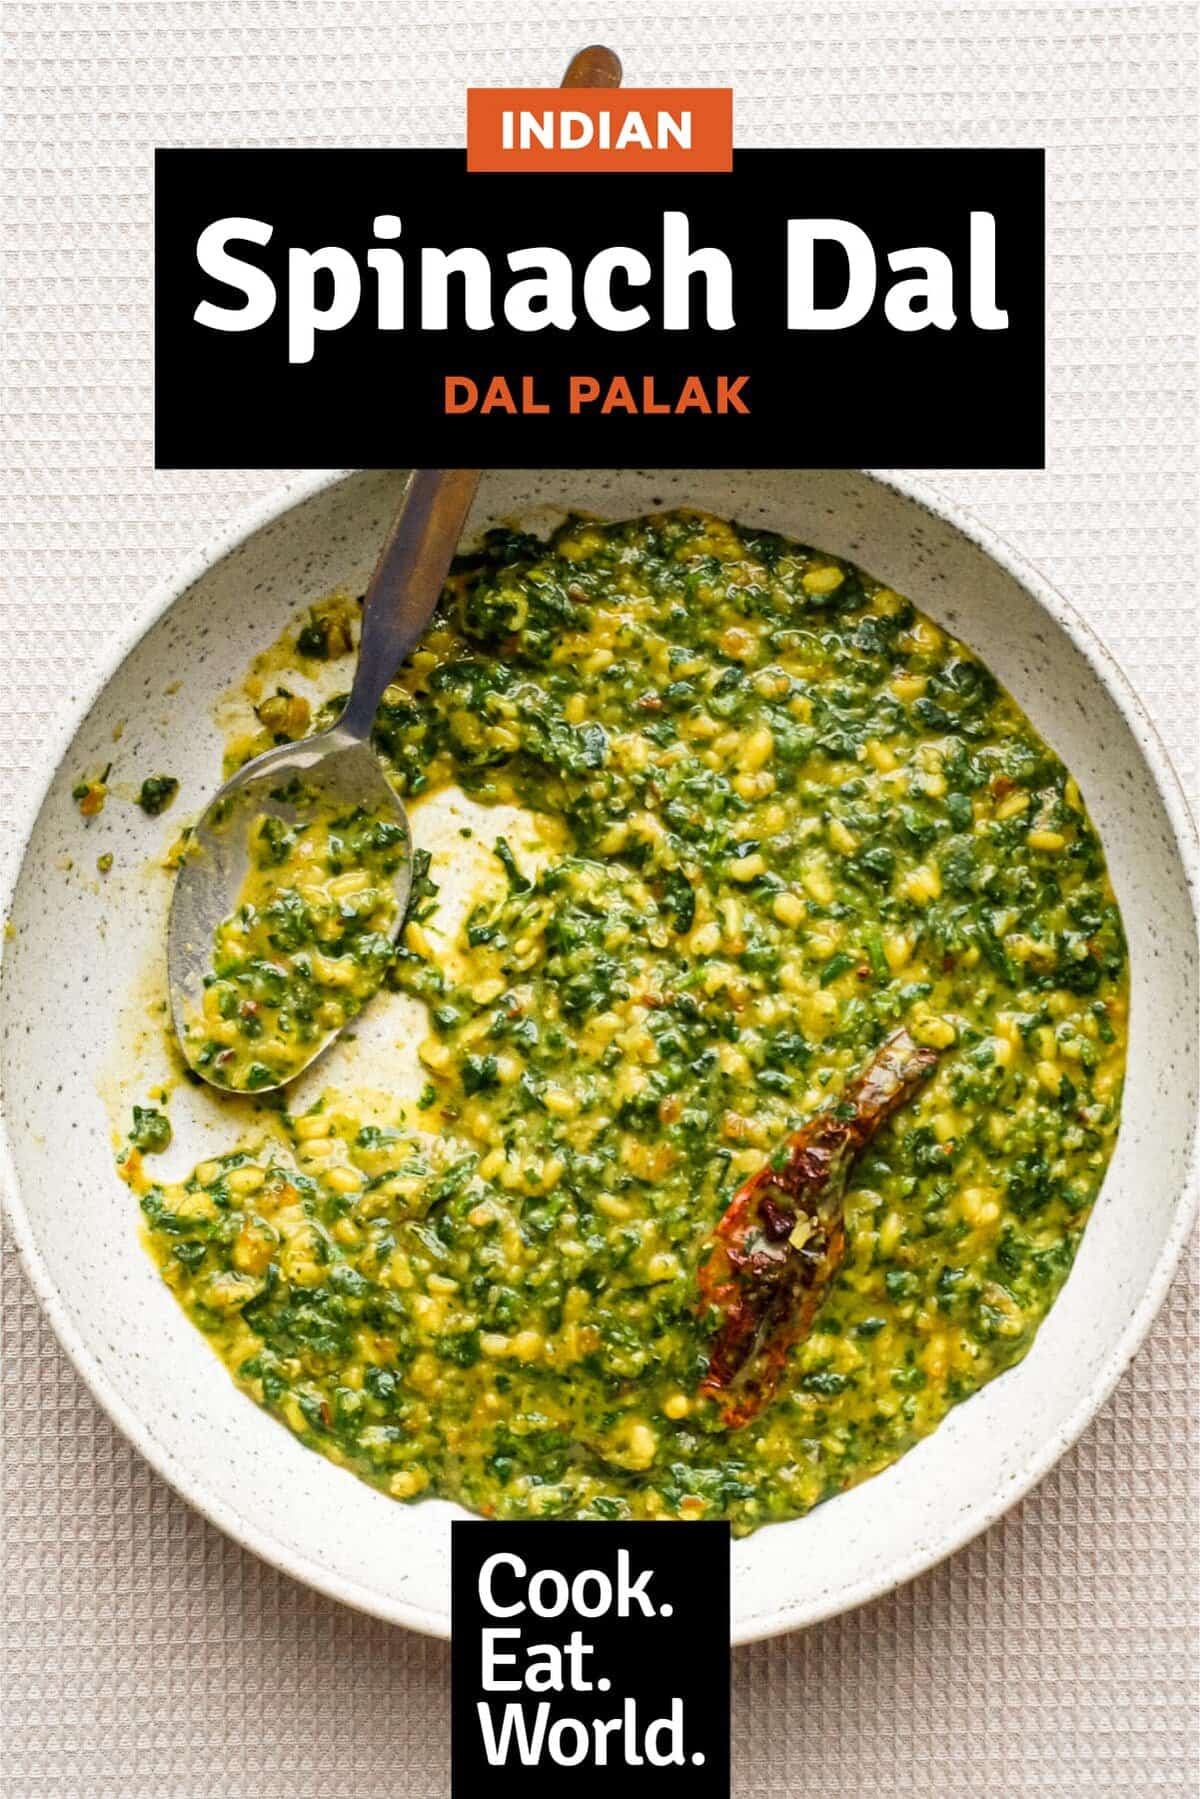 A bowl of Spinach Dal (Dal Palak) with a whole Kashmiri chilli in it.